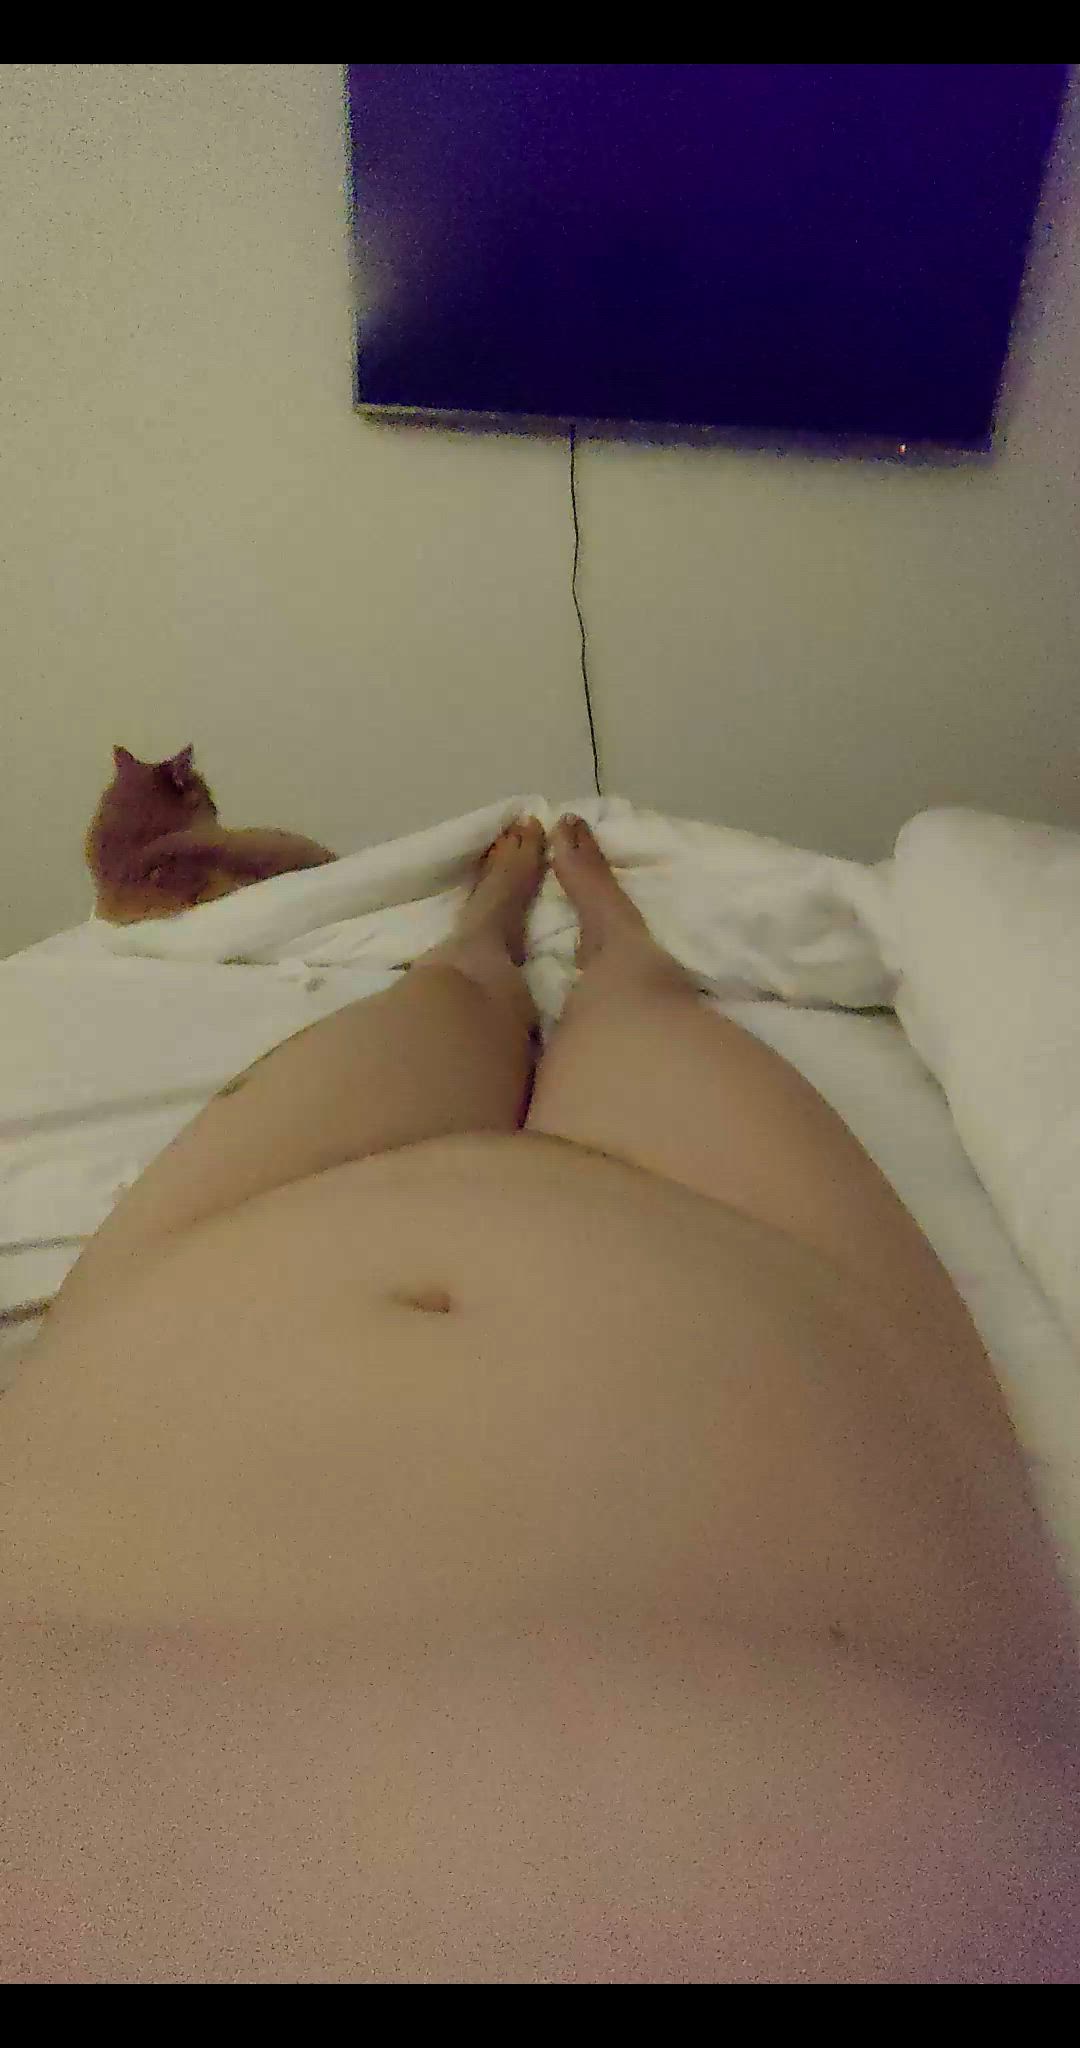 Amateur porn video with onlyfans model lolalumiere <strong>@lolalumiere</strong>